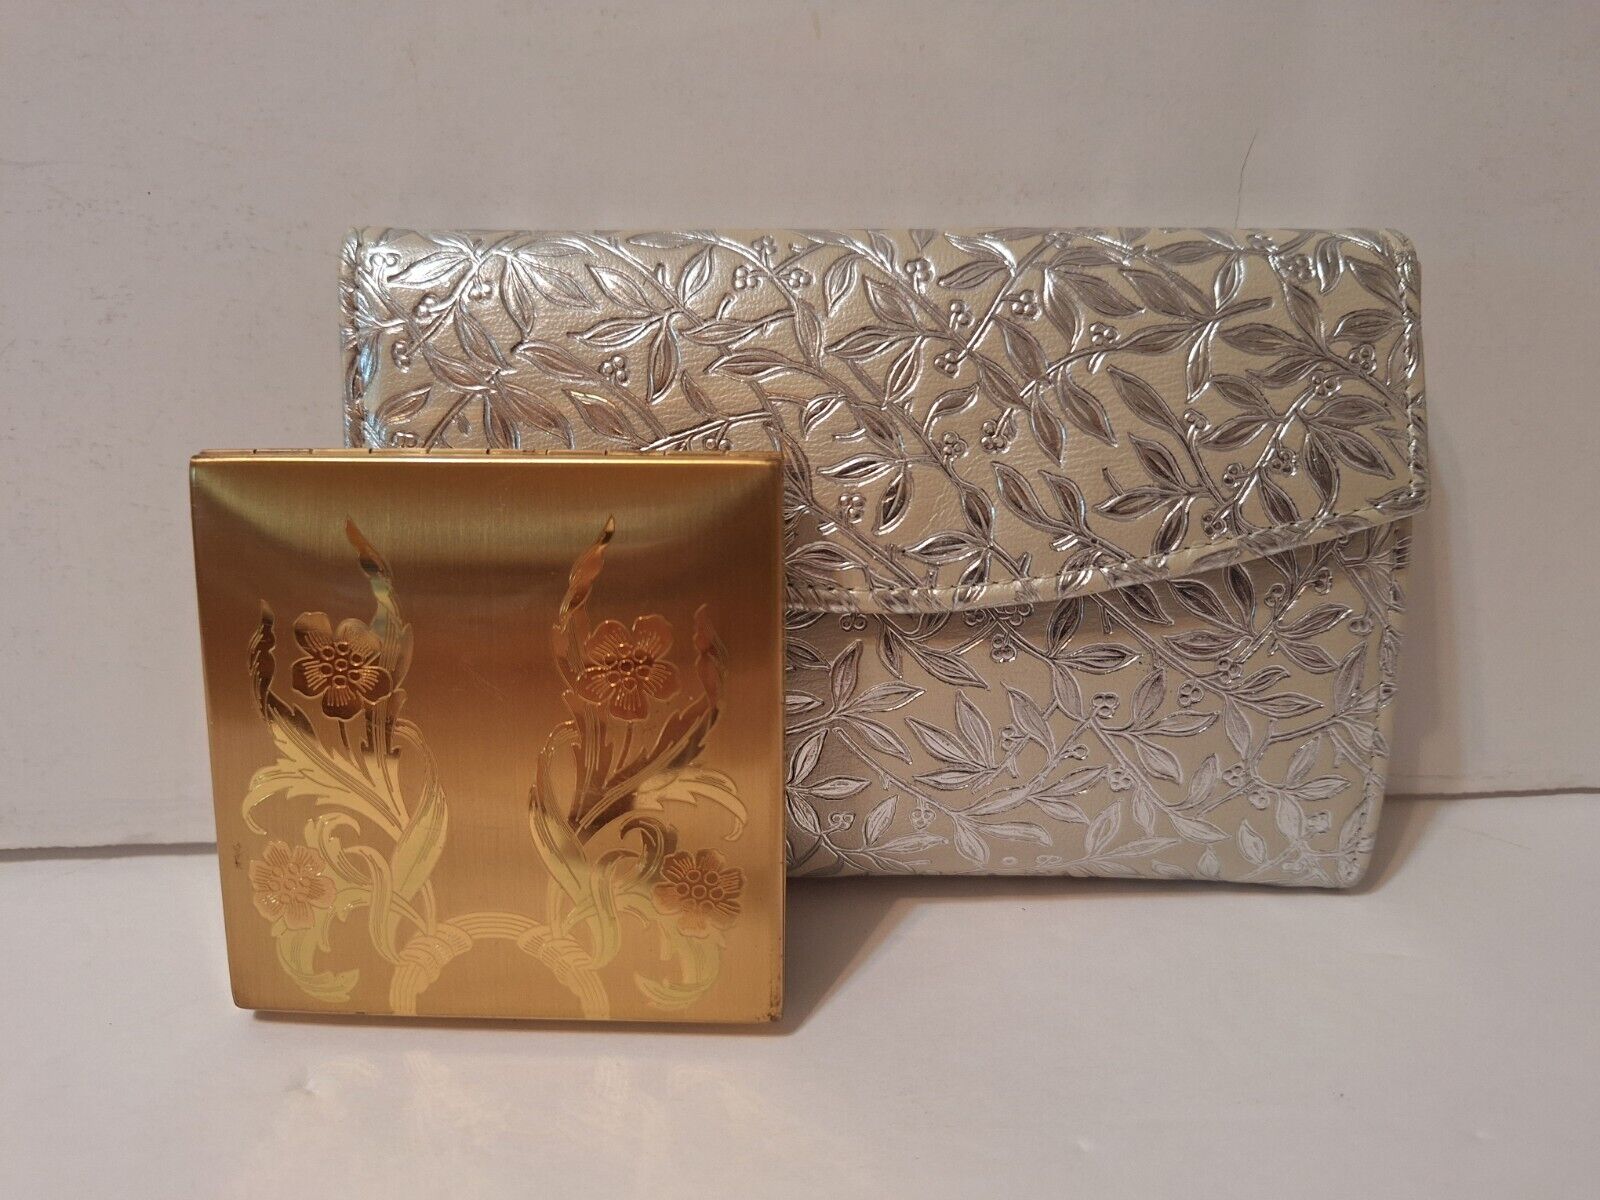 Vtg Elgin American Mirrored Powder Compact Etched Floral Gold Tone+Silver Clutch